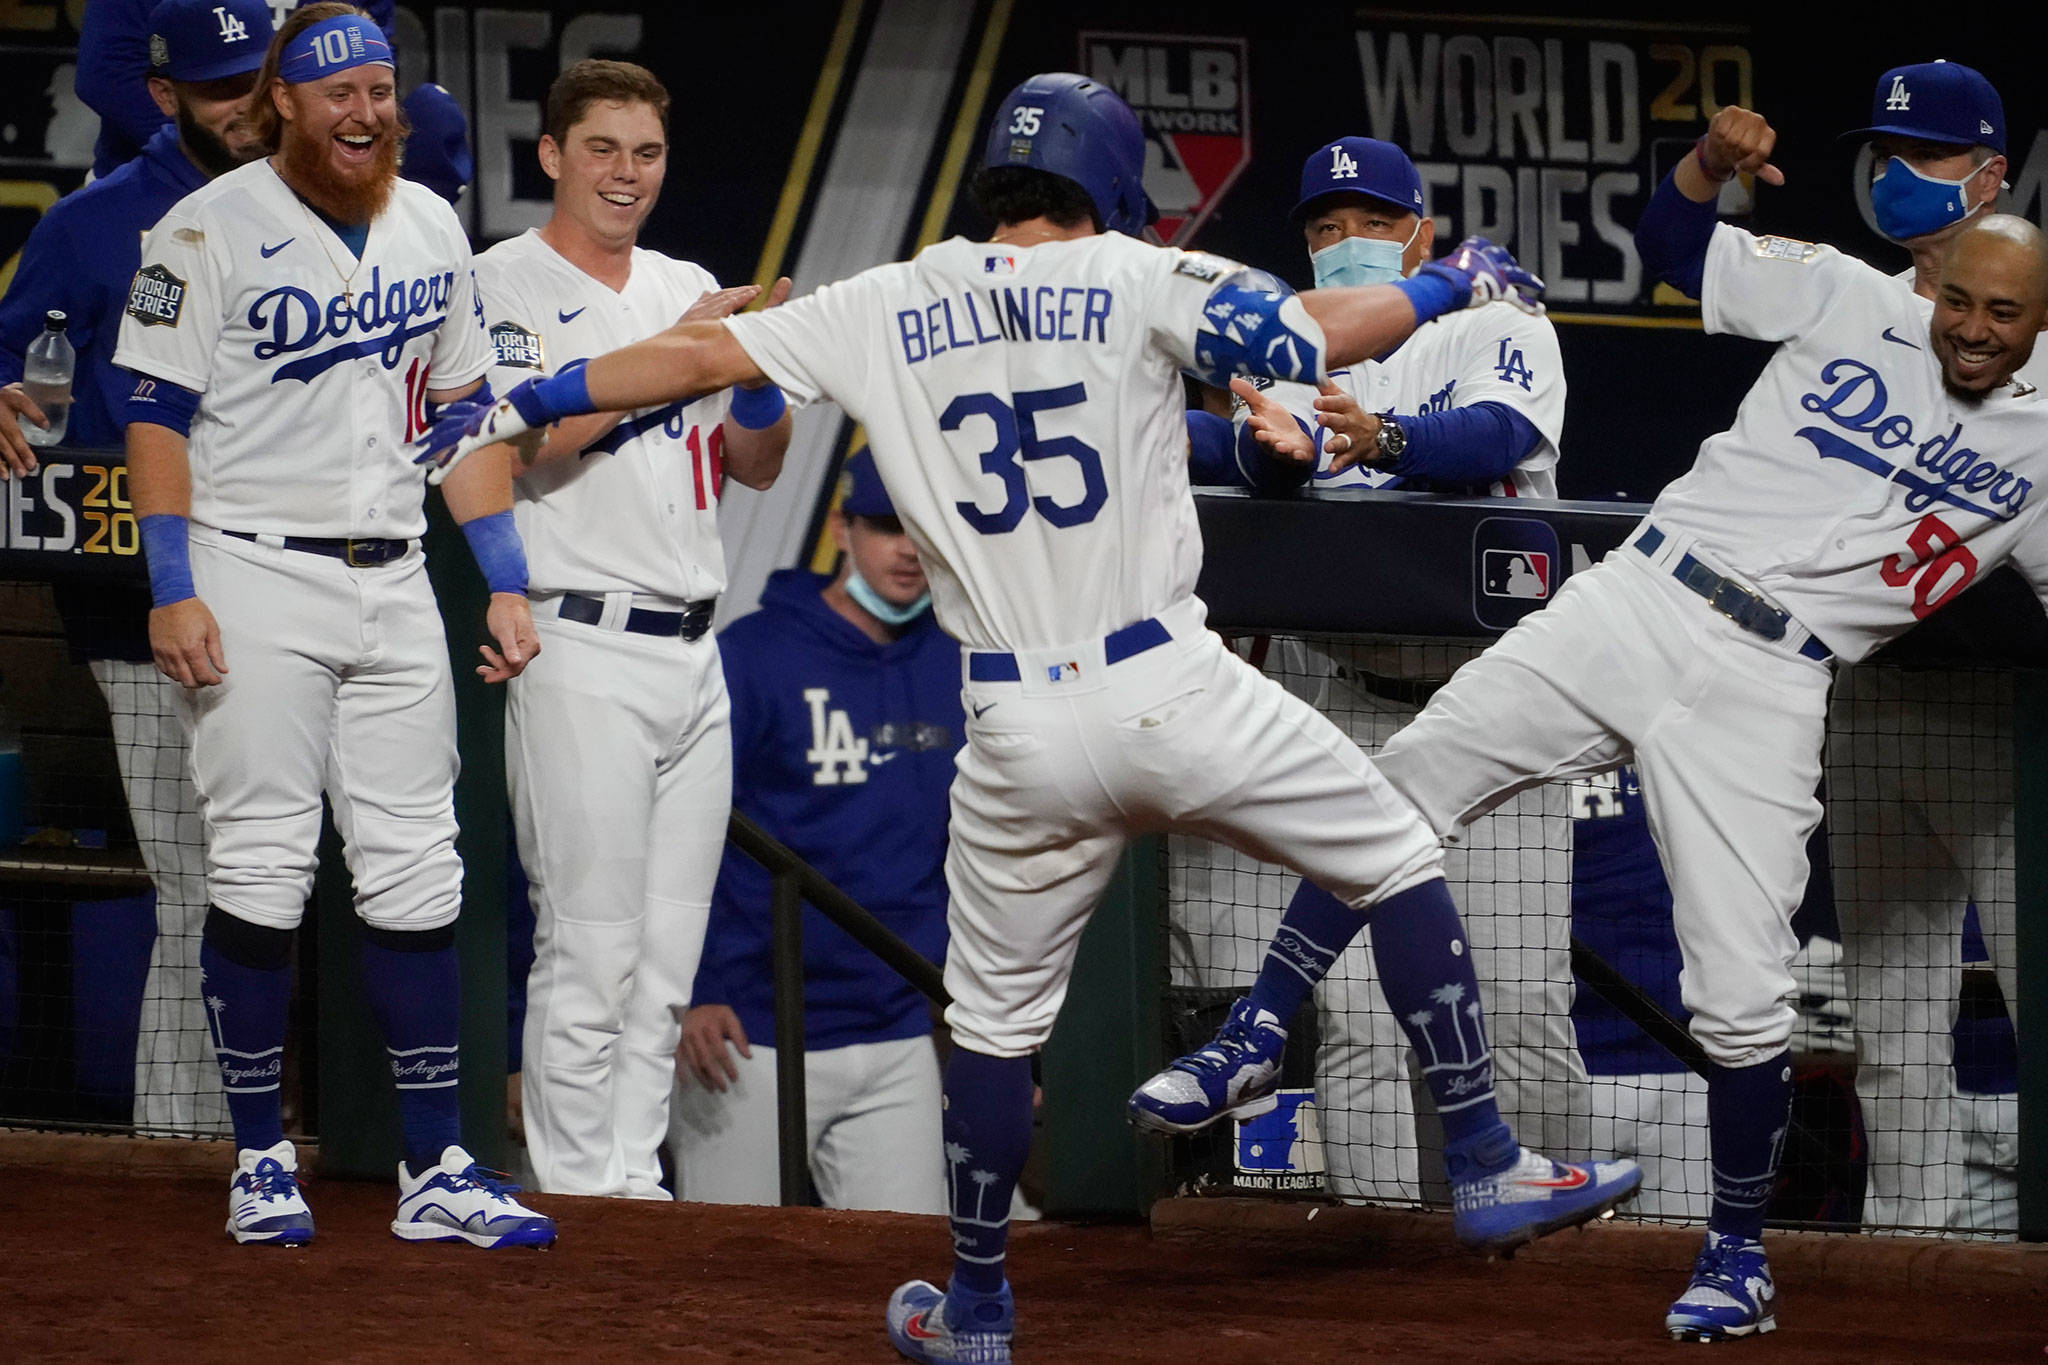 The Dodgers’ Cody Bellinger (35) celebrates his two-run home run against the Rays during the fourth inning of Game 1 of the World Series on Oct. 20, 2020, in Arlington, Texas. (AP Photo/Tony Gutierrez)